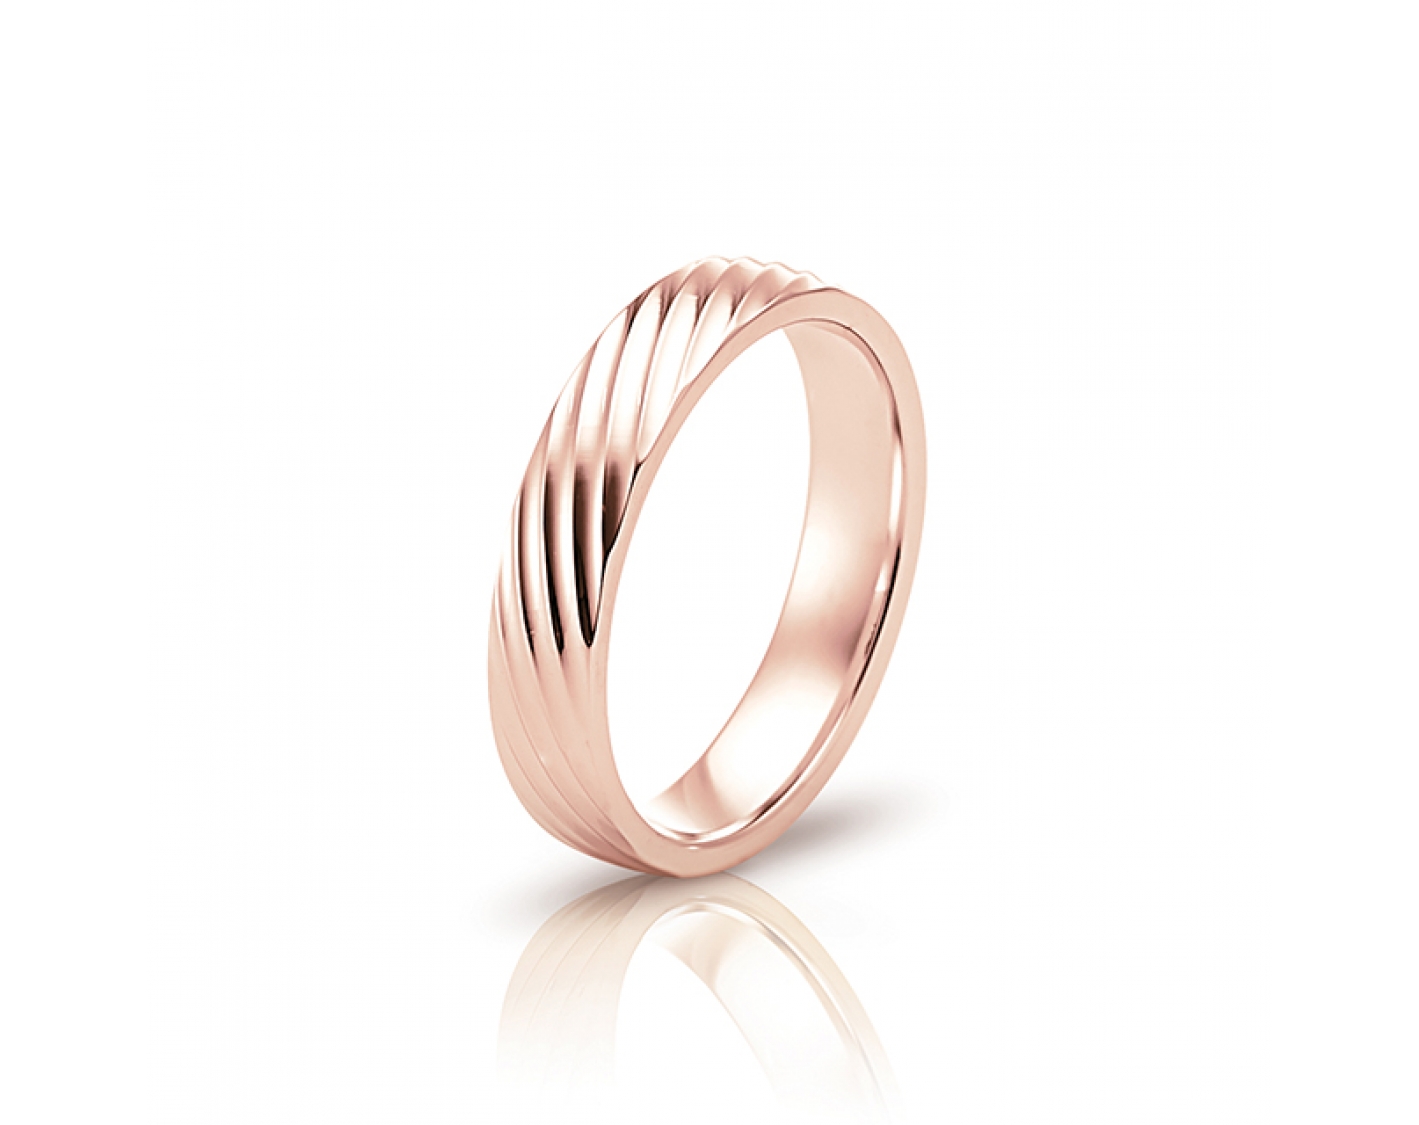 18k rose gold 5mm matte wedding band with shiny lines